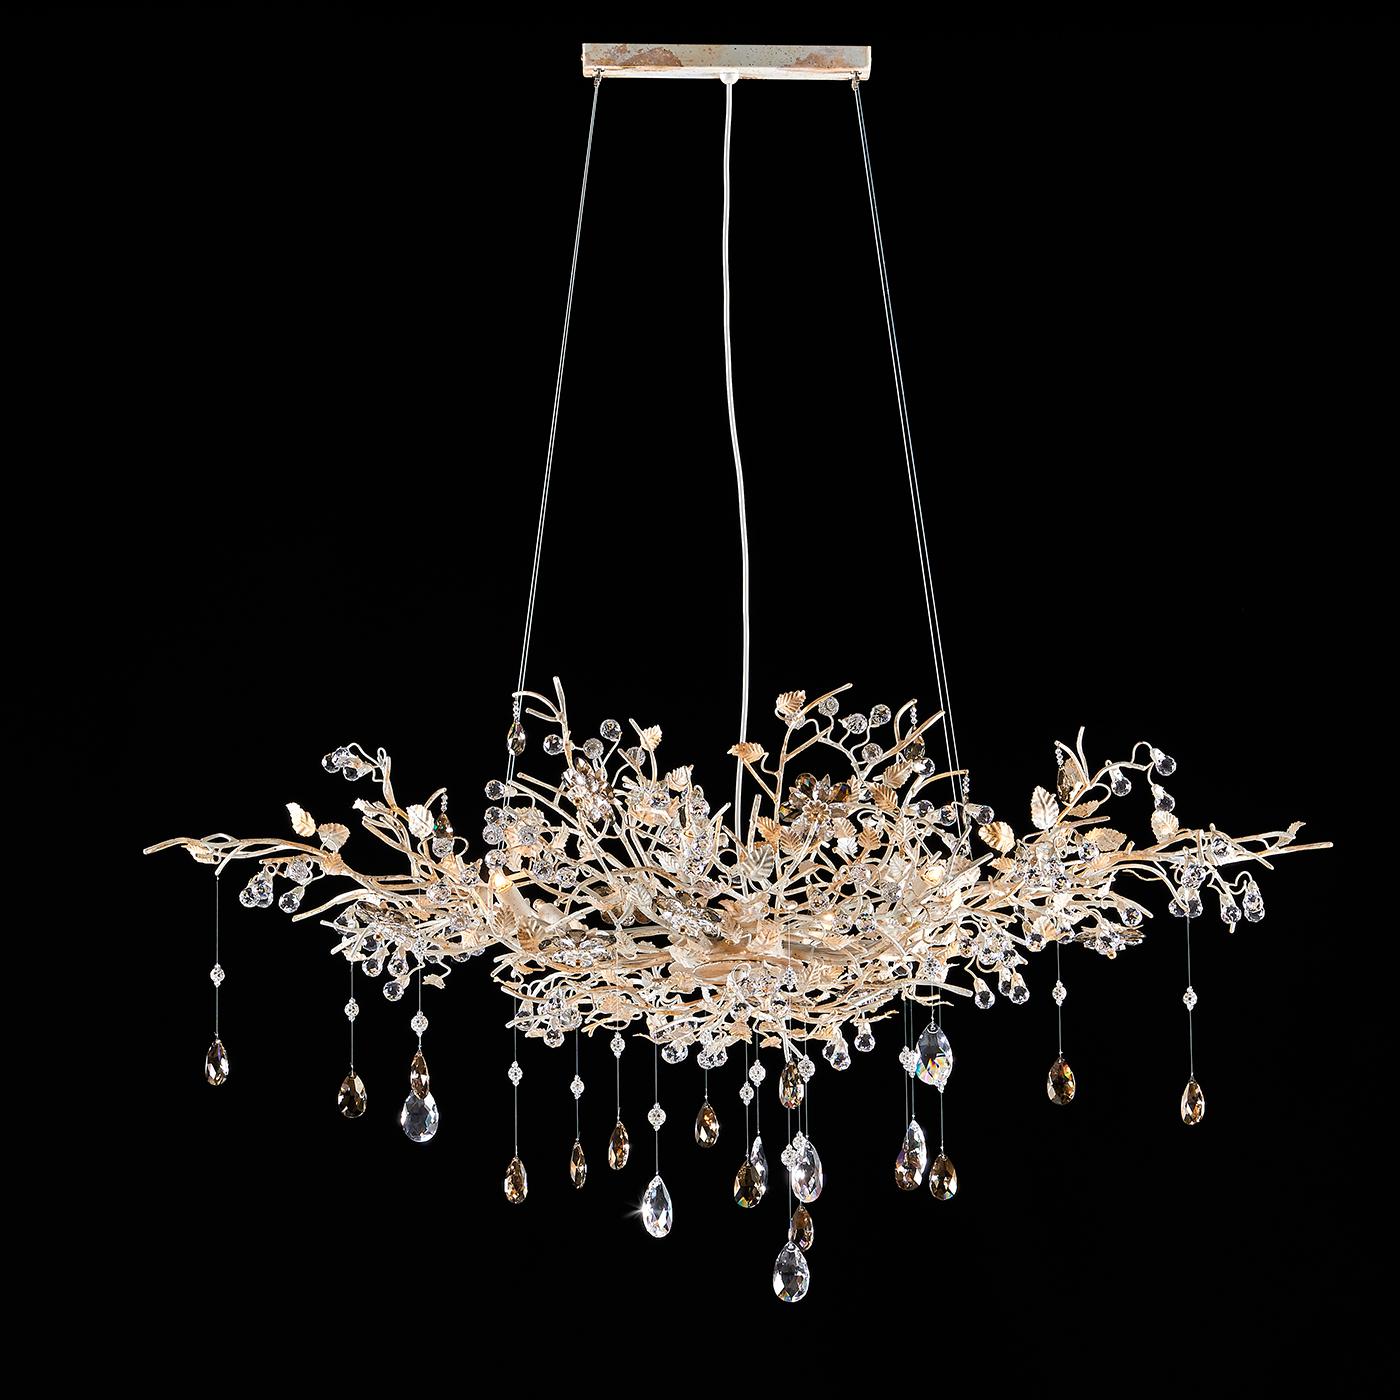 A delicate and classy suspension lamp in white painted metal and inserts in gold leaf. The frame is further enhanced with precious as four crystal spheres, two-tone flowers, and crystal pendants. It provides a great and uniform illumination perfect